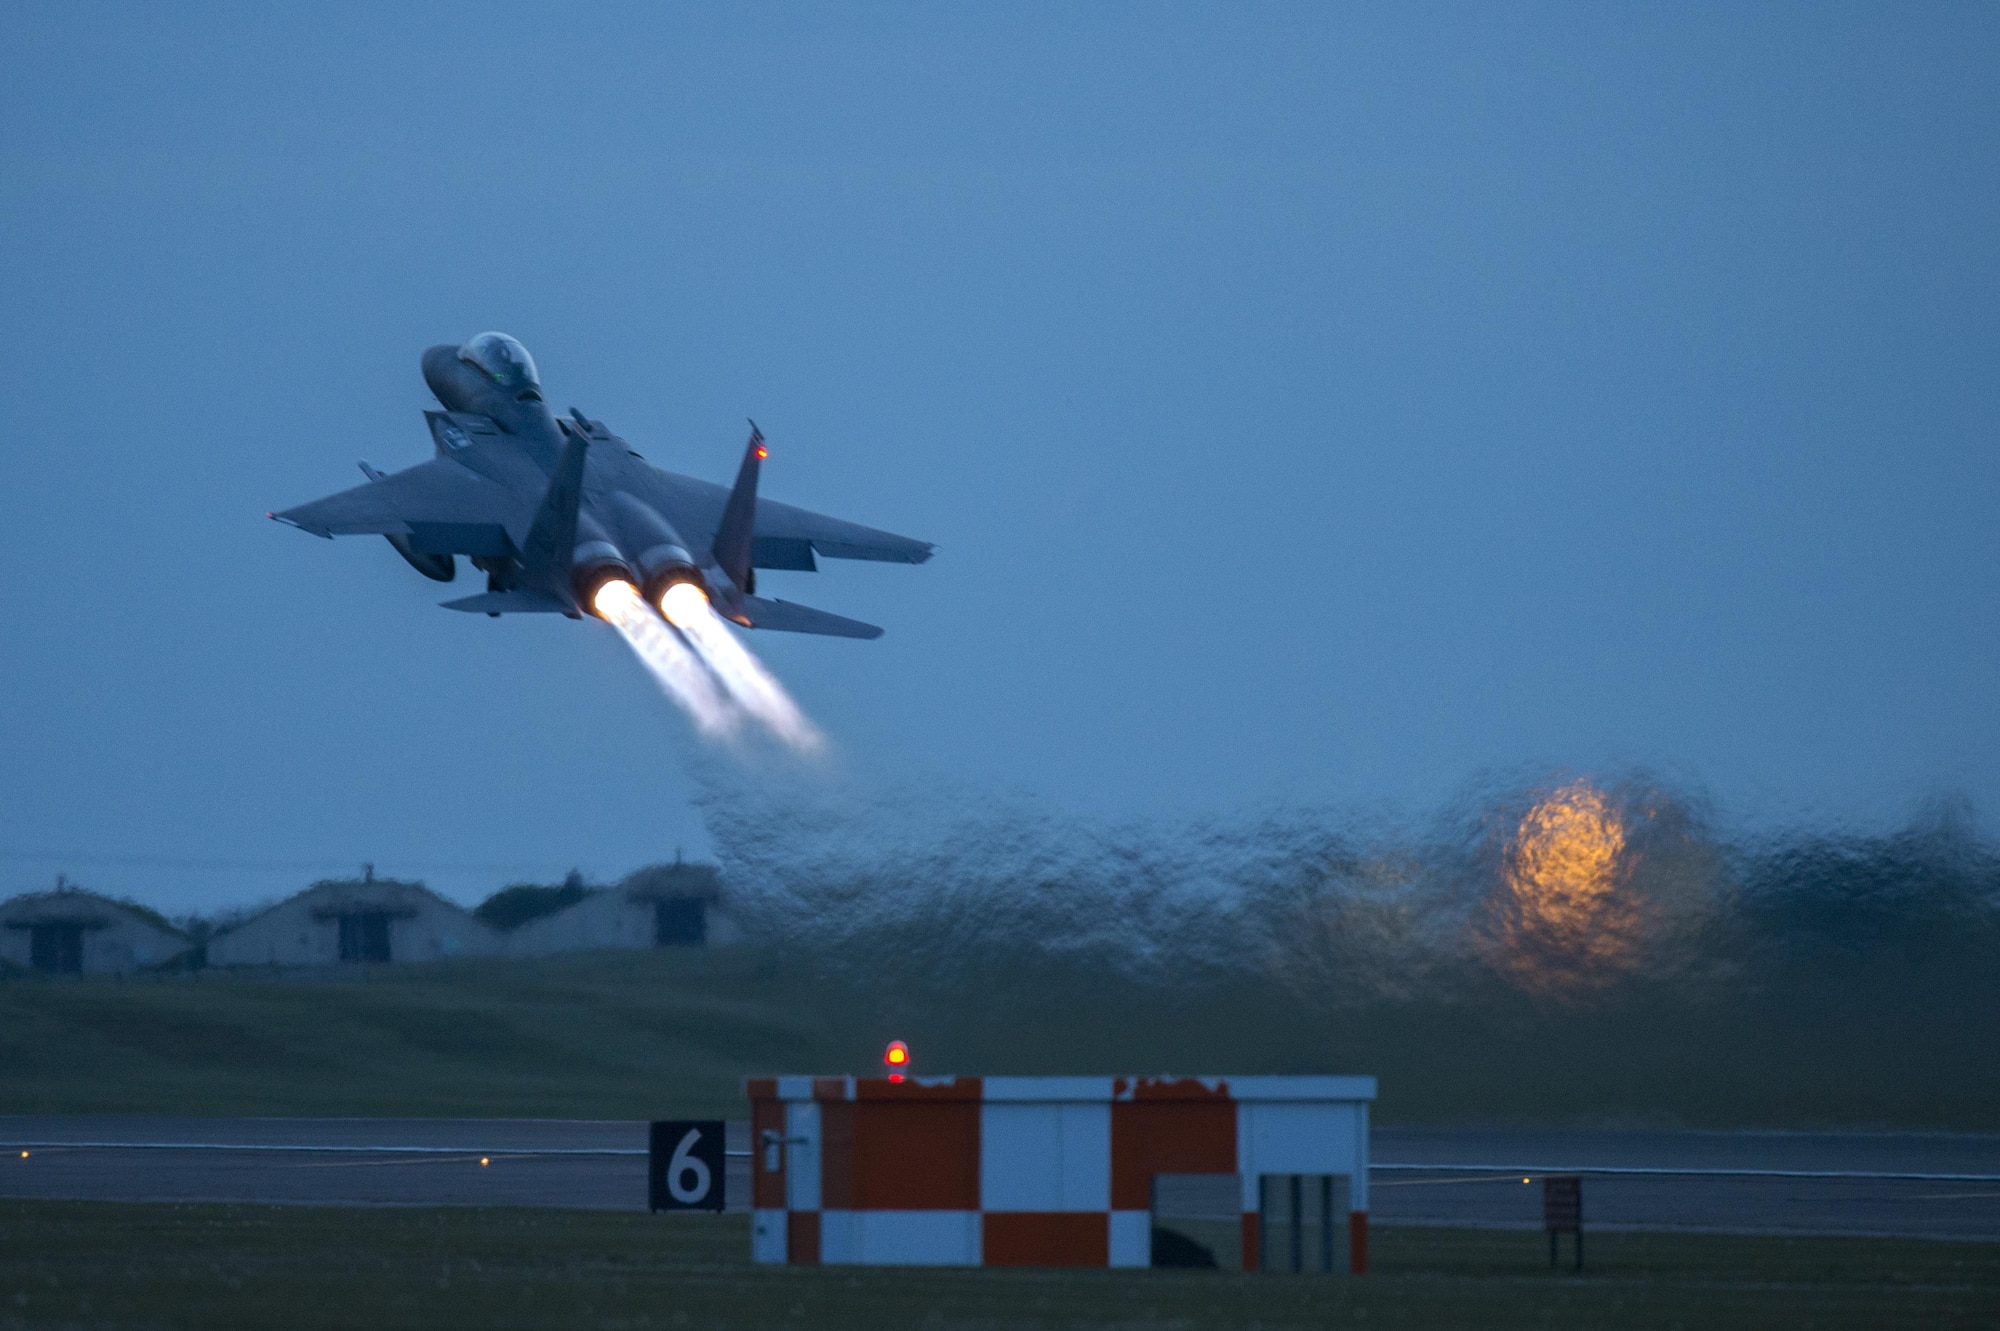 An F-15E Strike Eagle takes-off for a training sortie at Royal Air Force Lakenheath, England, April 19. Nighttime flying operations are required to maintain aircrew proficiency and ensure our pilots remain ready to meet future challenges. (U.S. Air Force photo/Staff Sgt. Emerson Nuñez)